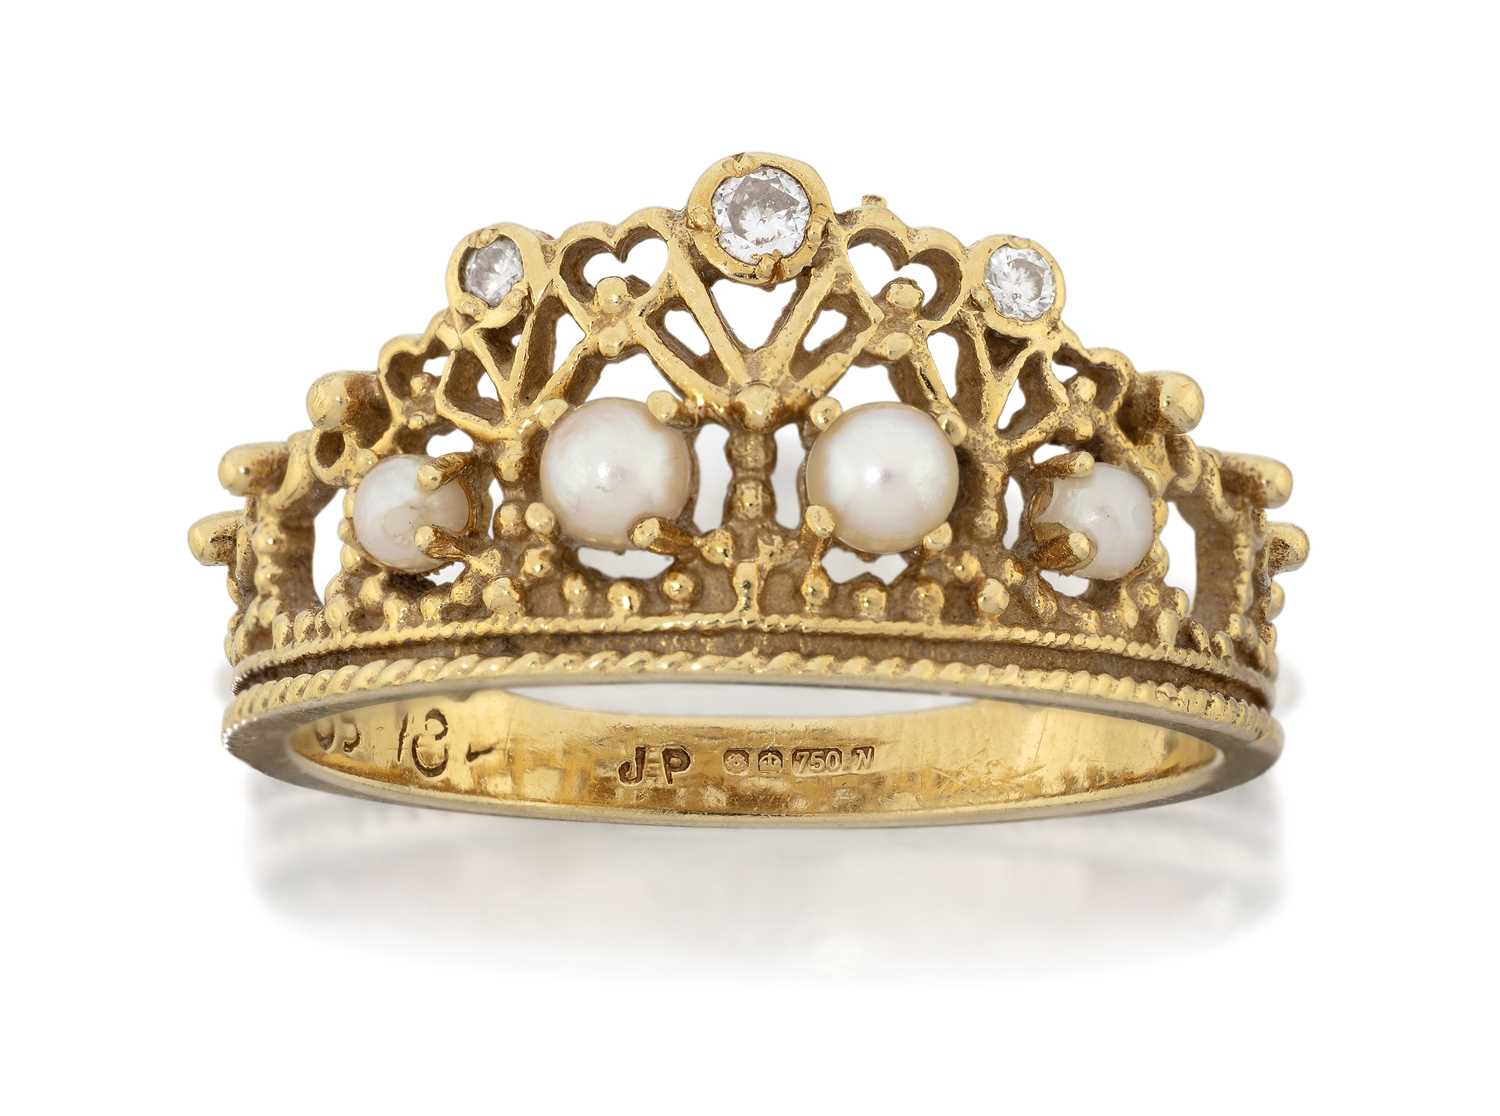 Lot 2140 - An 18 Carat Gold Diamond and Cultured Pearl Ring